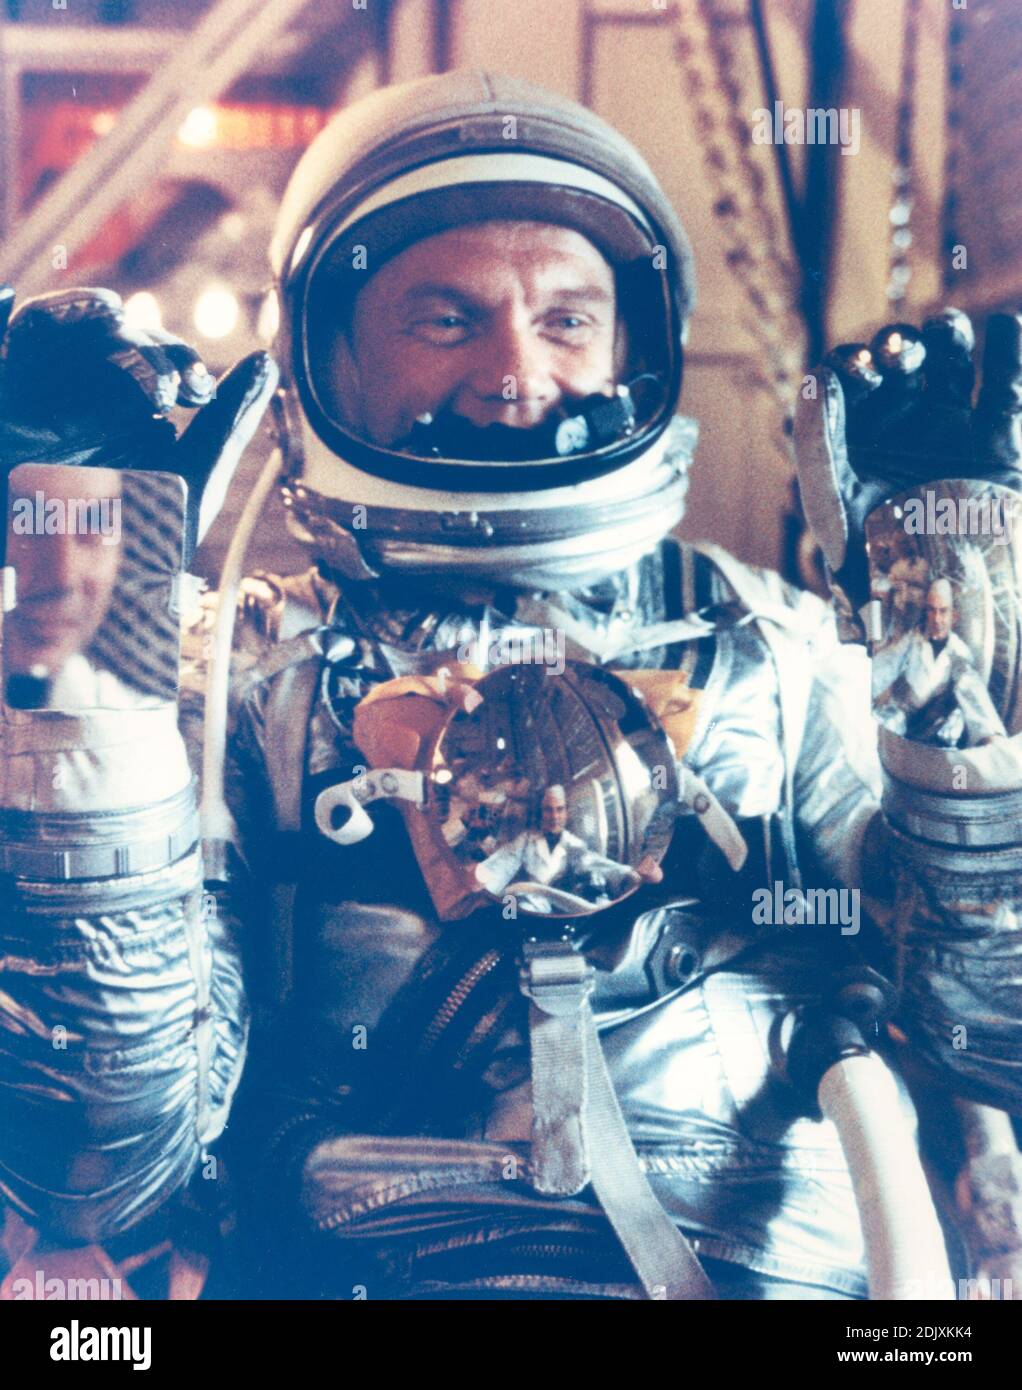 Astronaut John Glenn gives ready sign during Mercury-Atlas 6 pre- launch training activities. Please note: Fees charged by the agency are for the agency 2019 ;s services only, and do not, nor are they intended to, convey to the user any ownership of Copyright or License in the material. The agency does not claim any ownership including but not limited to Copyright or License in the attached material. By publishing this material you expressly agree to indemnify and to hold the agency and its directors, shareholders and employees harmless from any loss, claims, damages, demands, expenses (includ Stock Photo